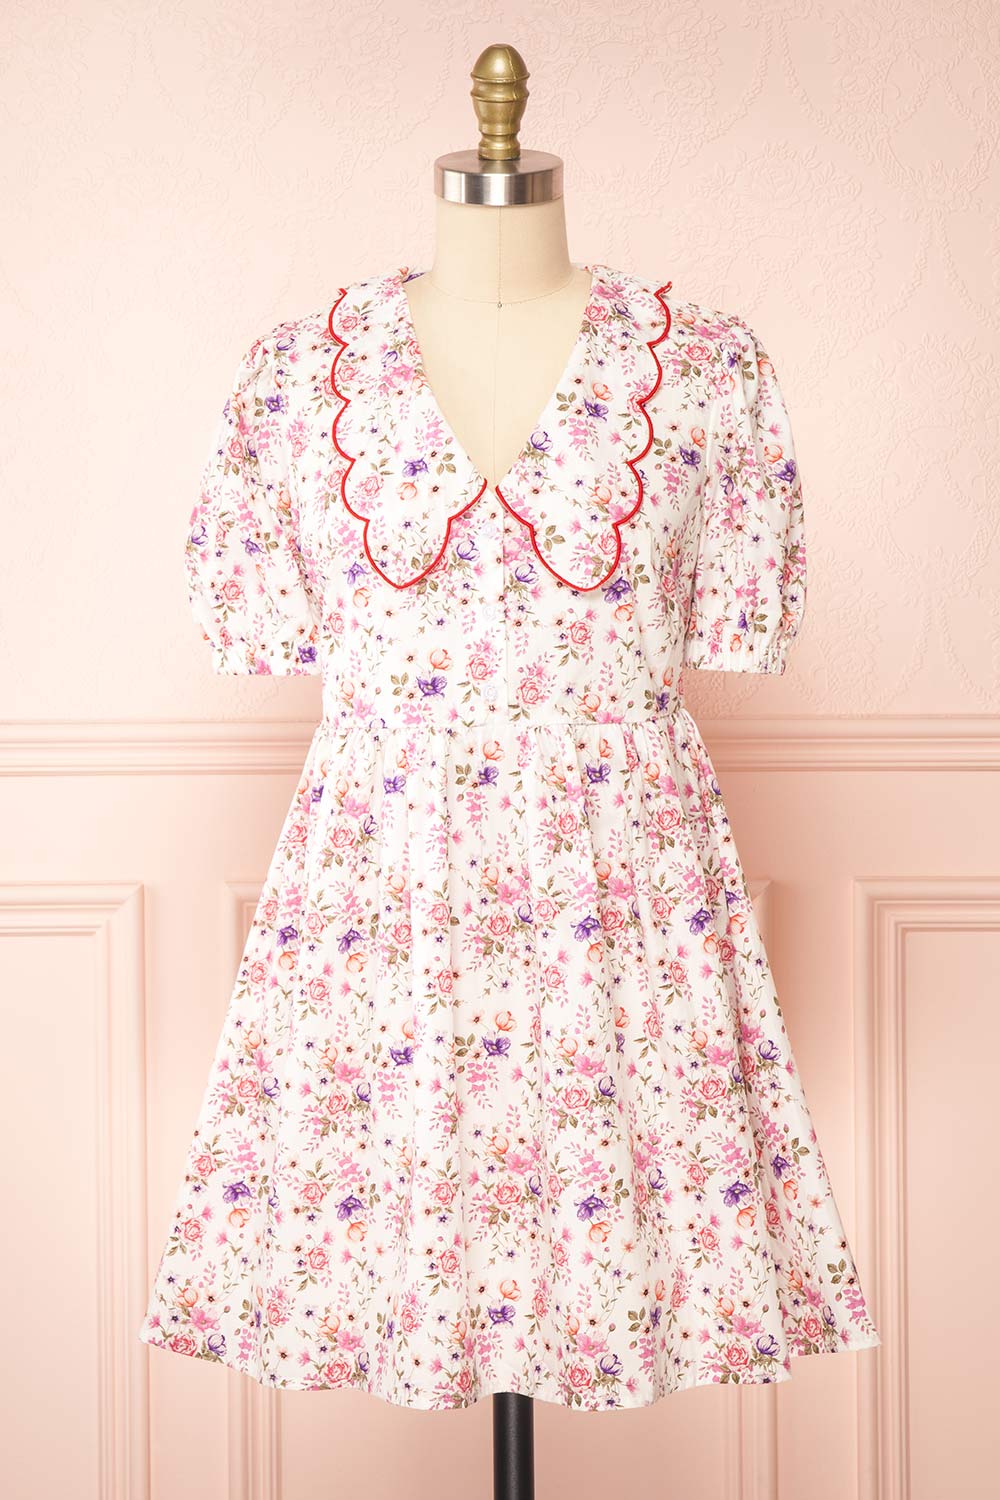 Crustalam Floral Babydoll Dress w/ Scalloped Collar | Boutique 1861 front view